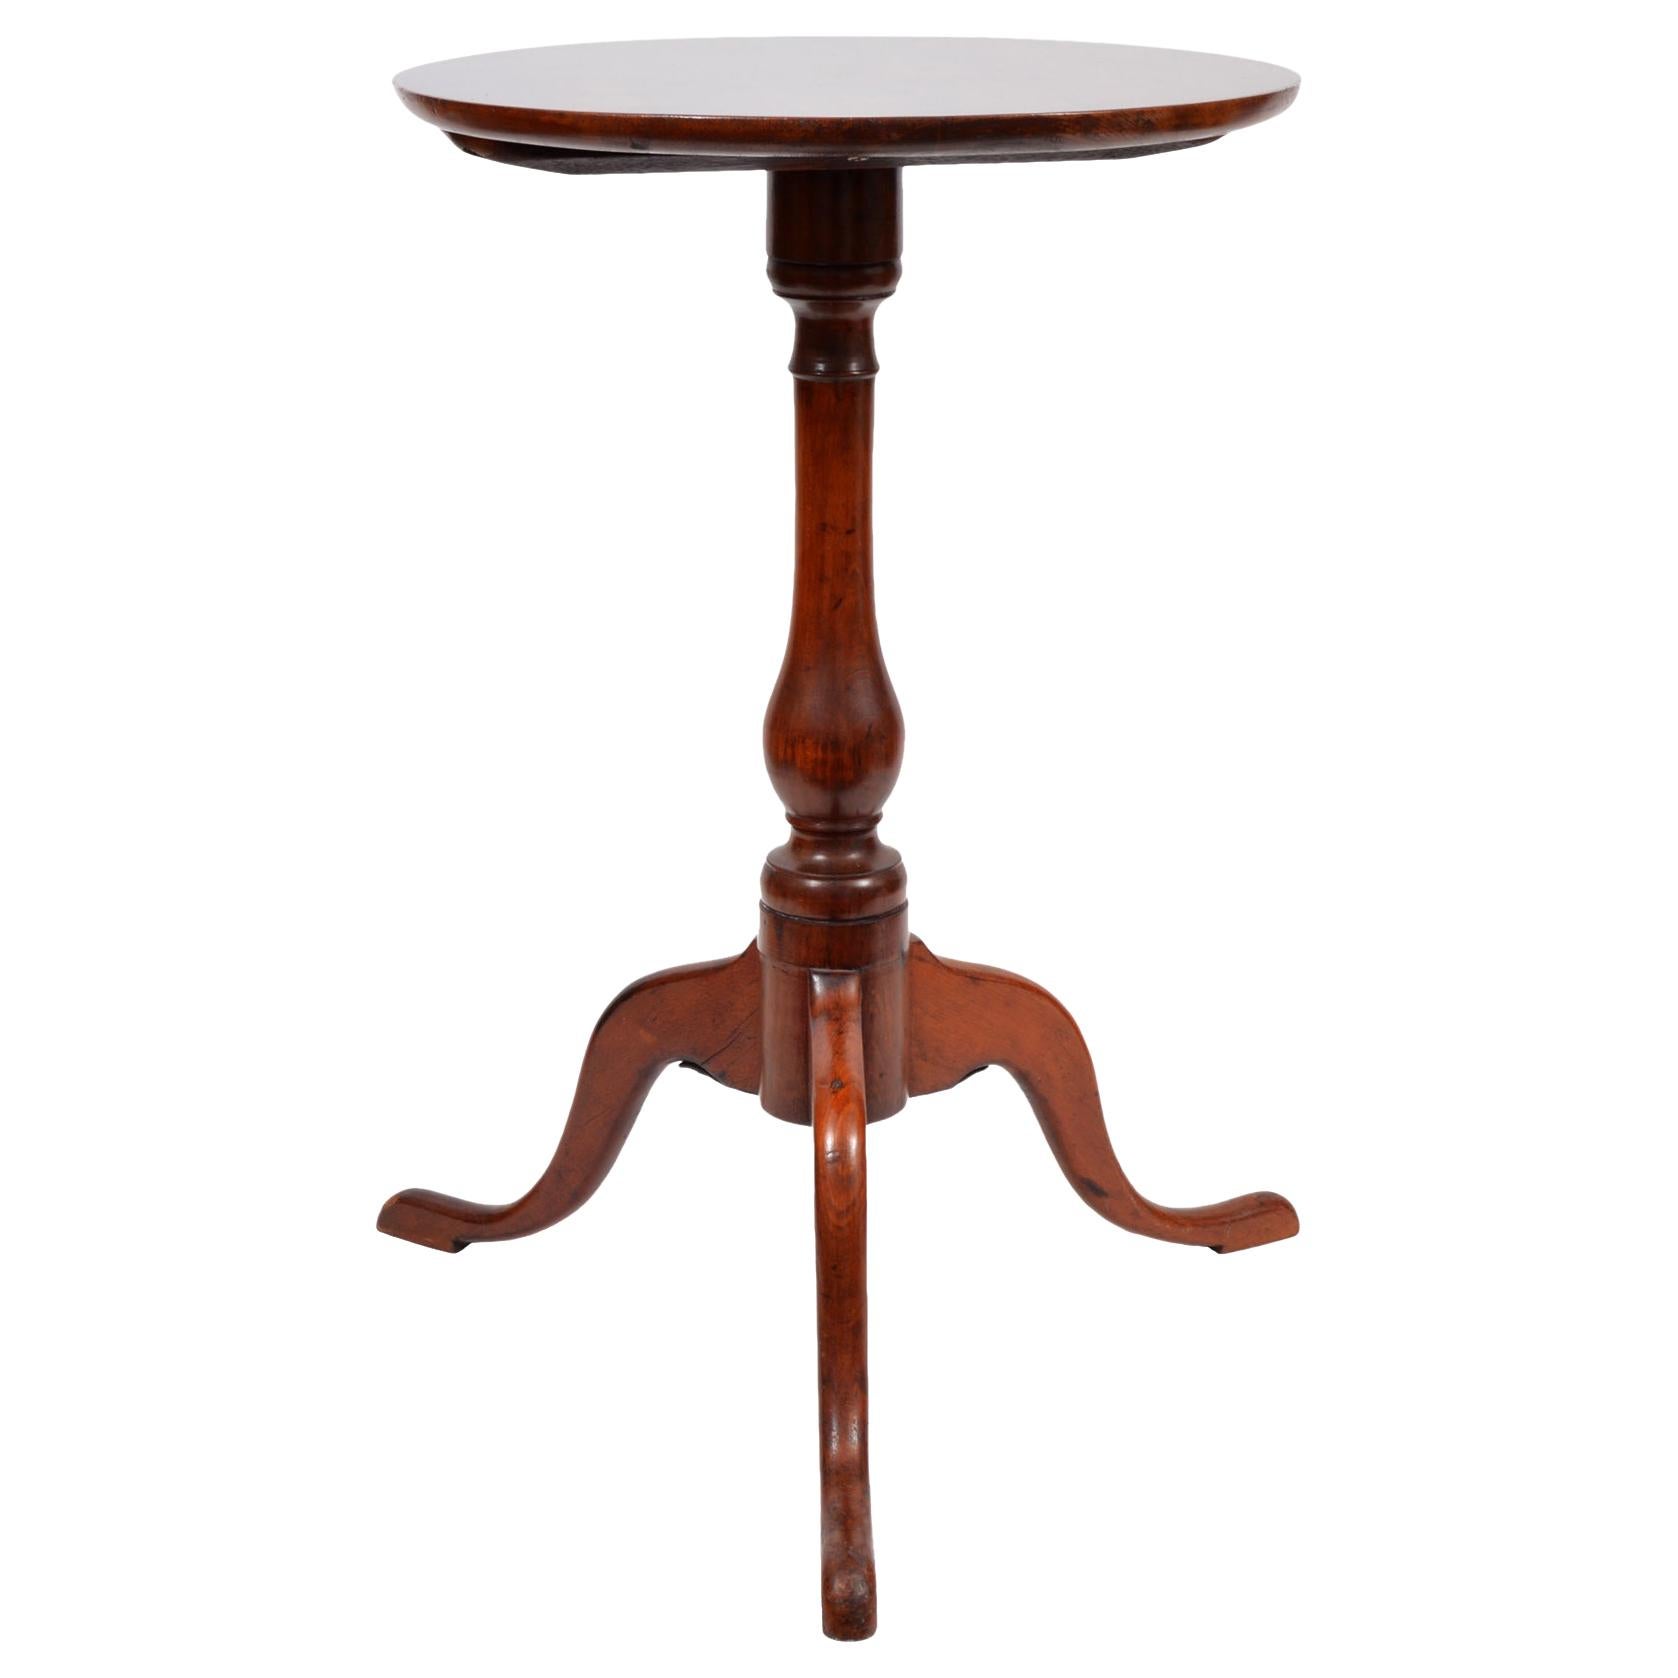 Early 19th Cent. American New England Queen Anne Style Cherrywood Candle Stand